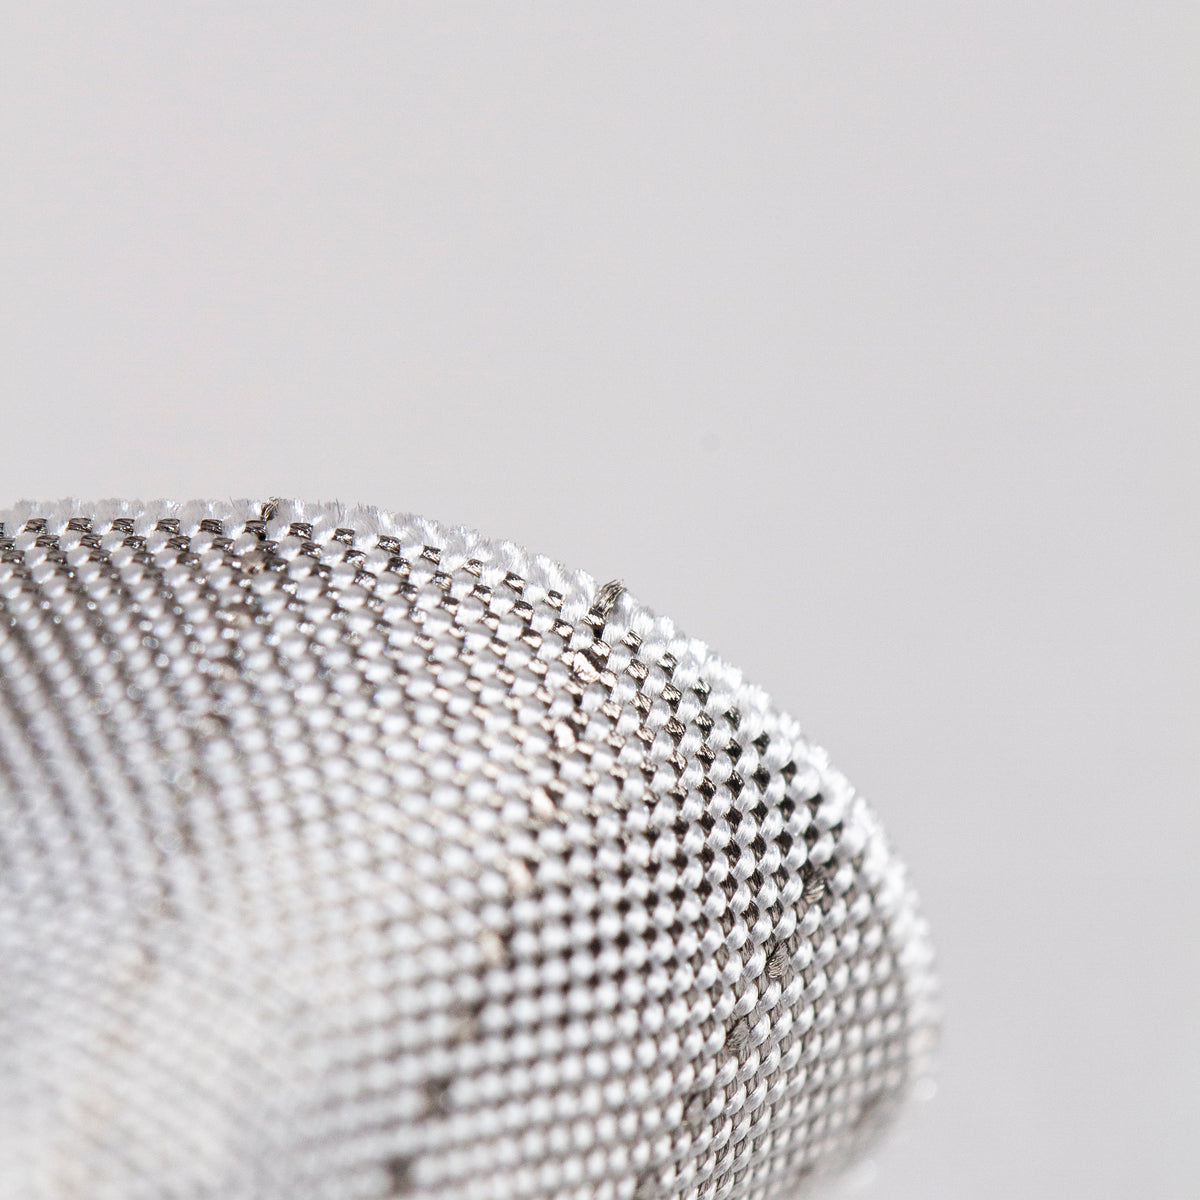 Close view of silver conductive fencing fabric that designed for fencing lamé jacket like foil and sabre